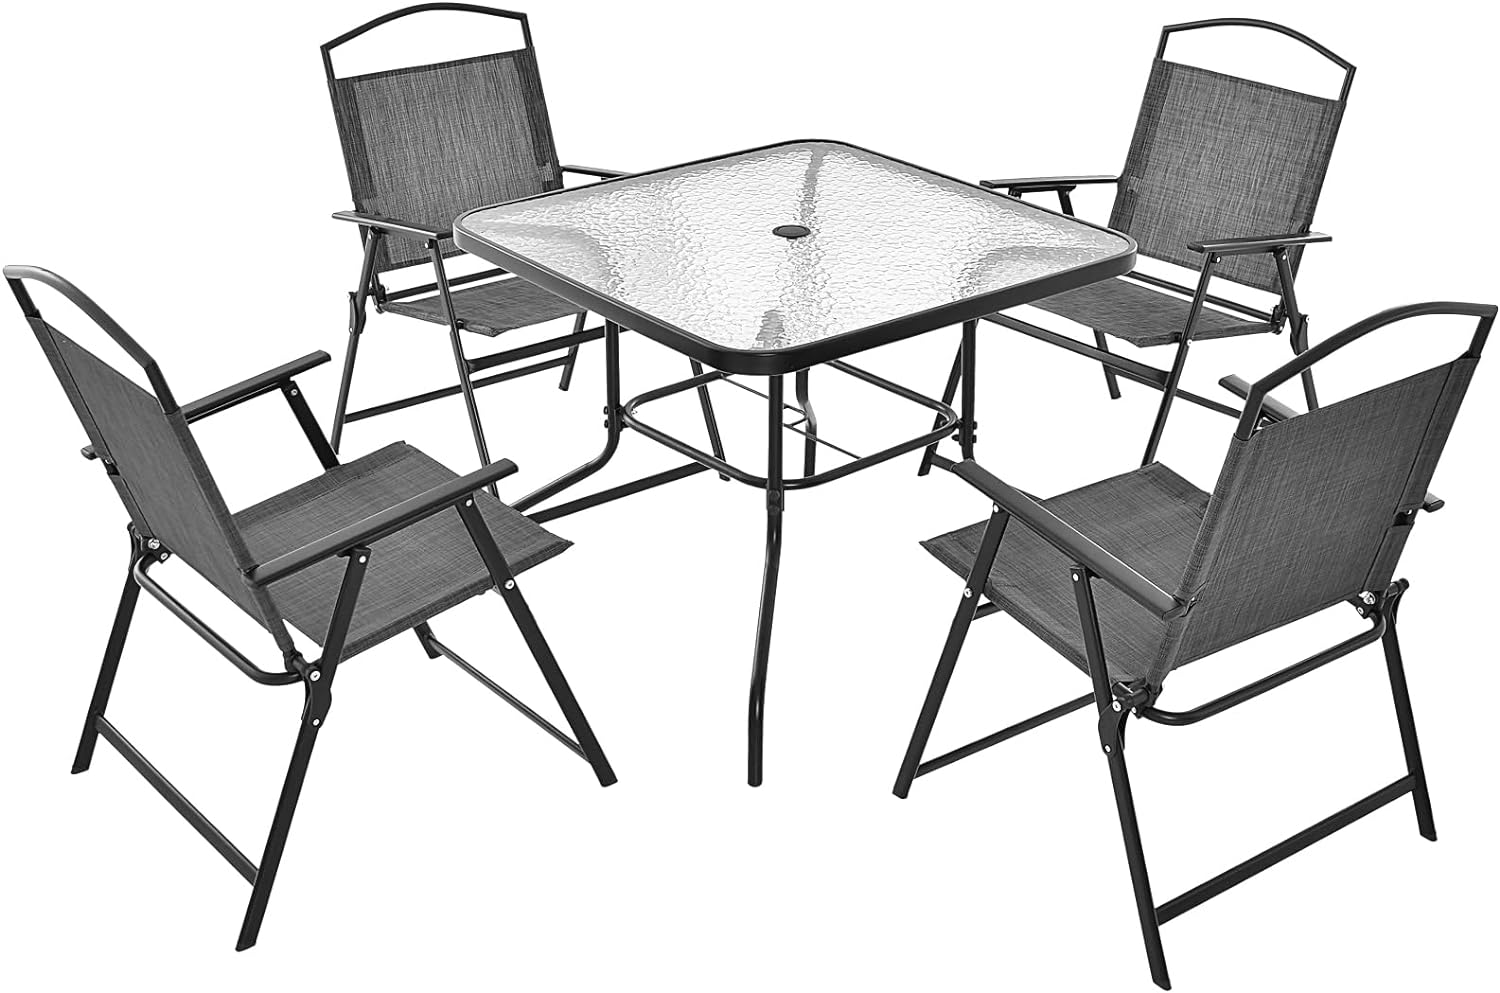 Giantex 4 Pieces Patio Dining Set, Outdoor Dining Table Set with 4 Folding Chairs (Gray)